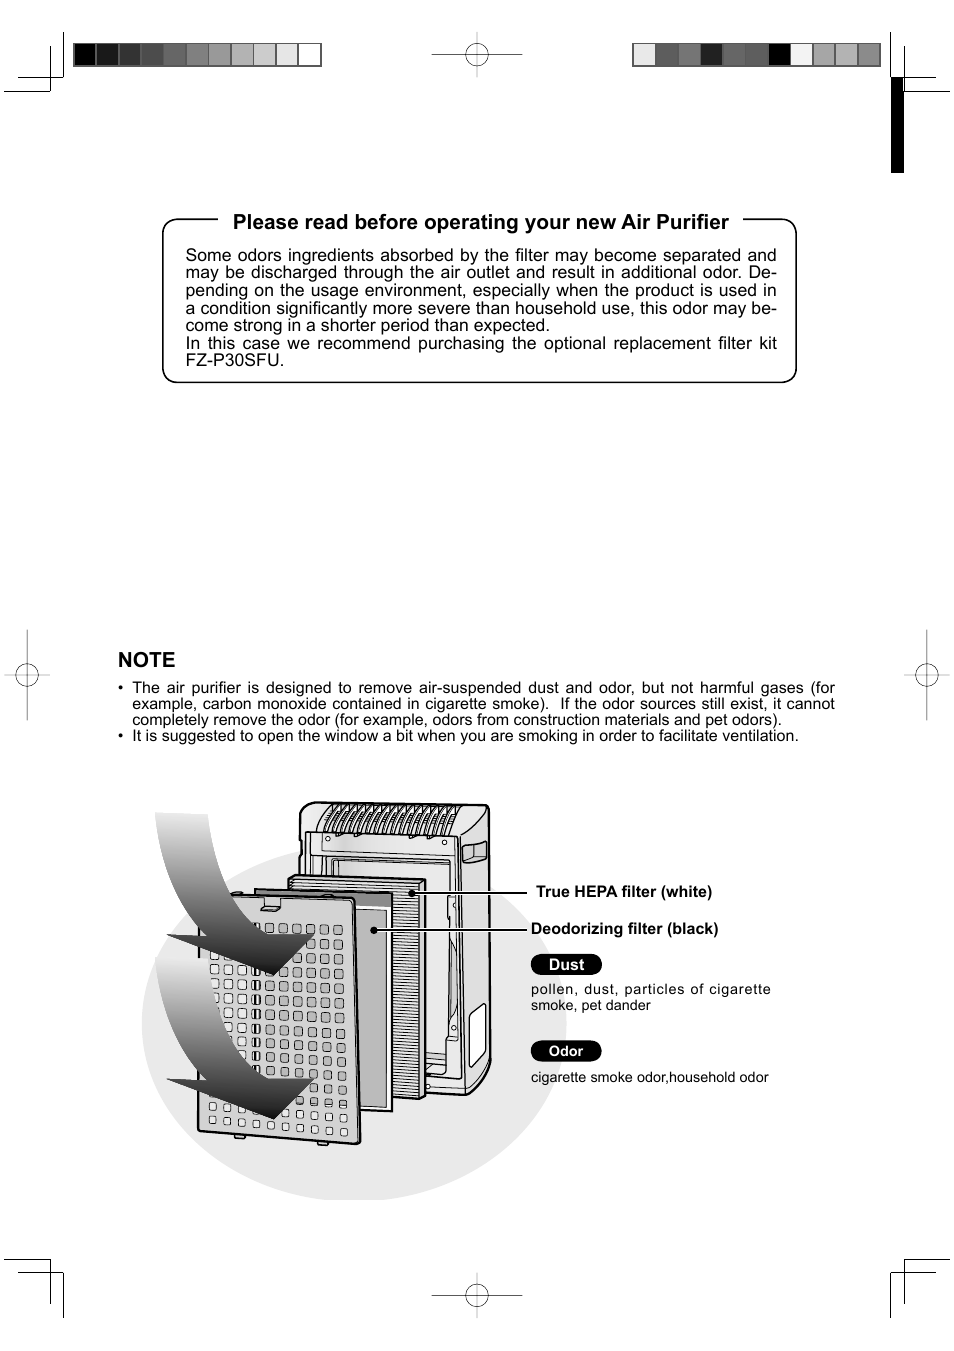 Please read before operating your new air purifier | Sharp Air Purifier with Humidifying Function KC-830U User Manual | Page 2 / 56